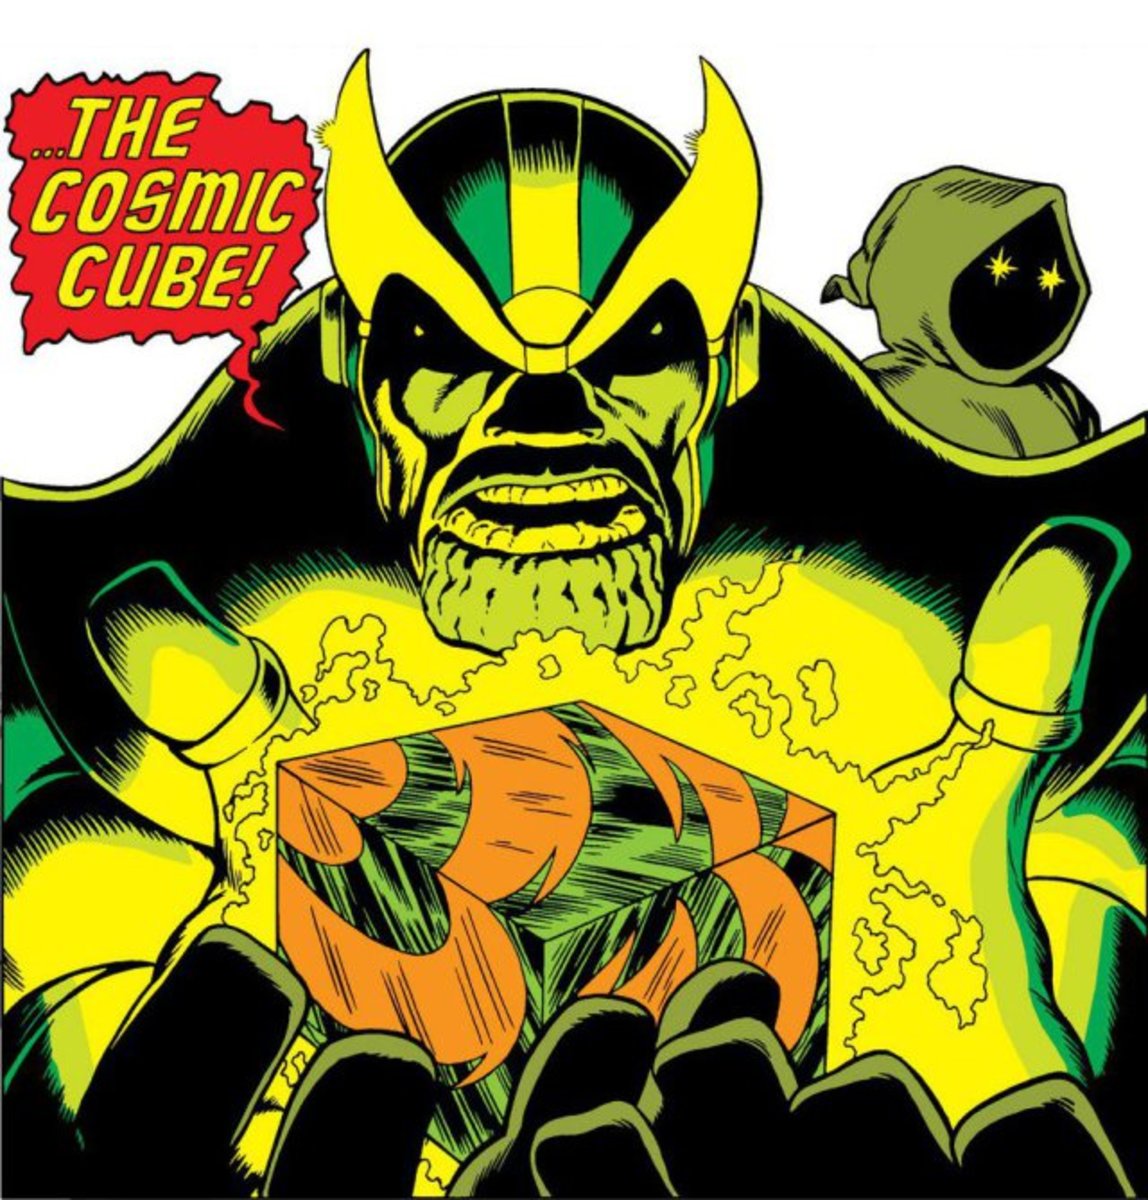 Thanos holding the Cosmic Cube (Tasseract) with Death to the right.